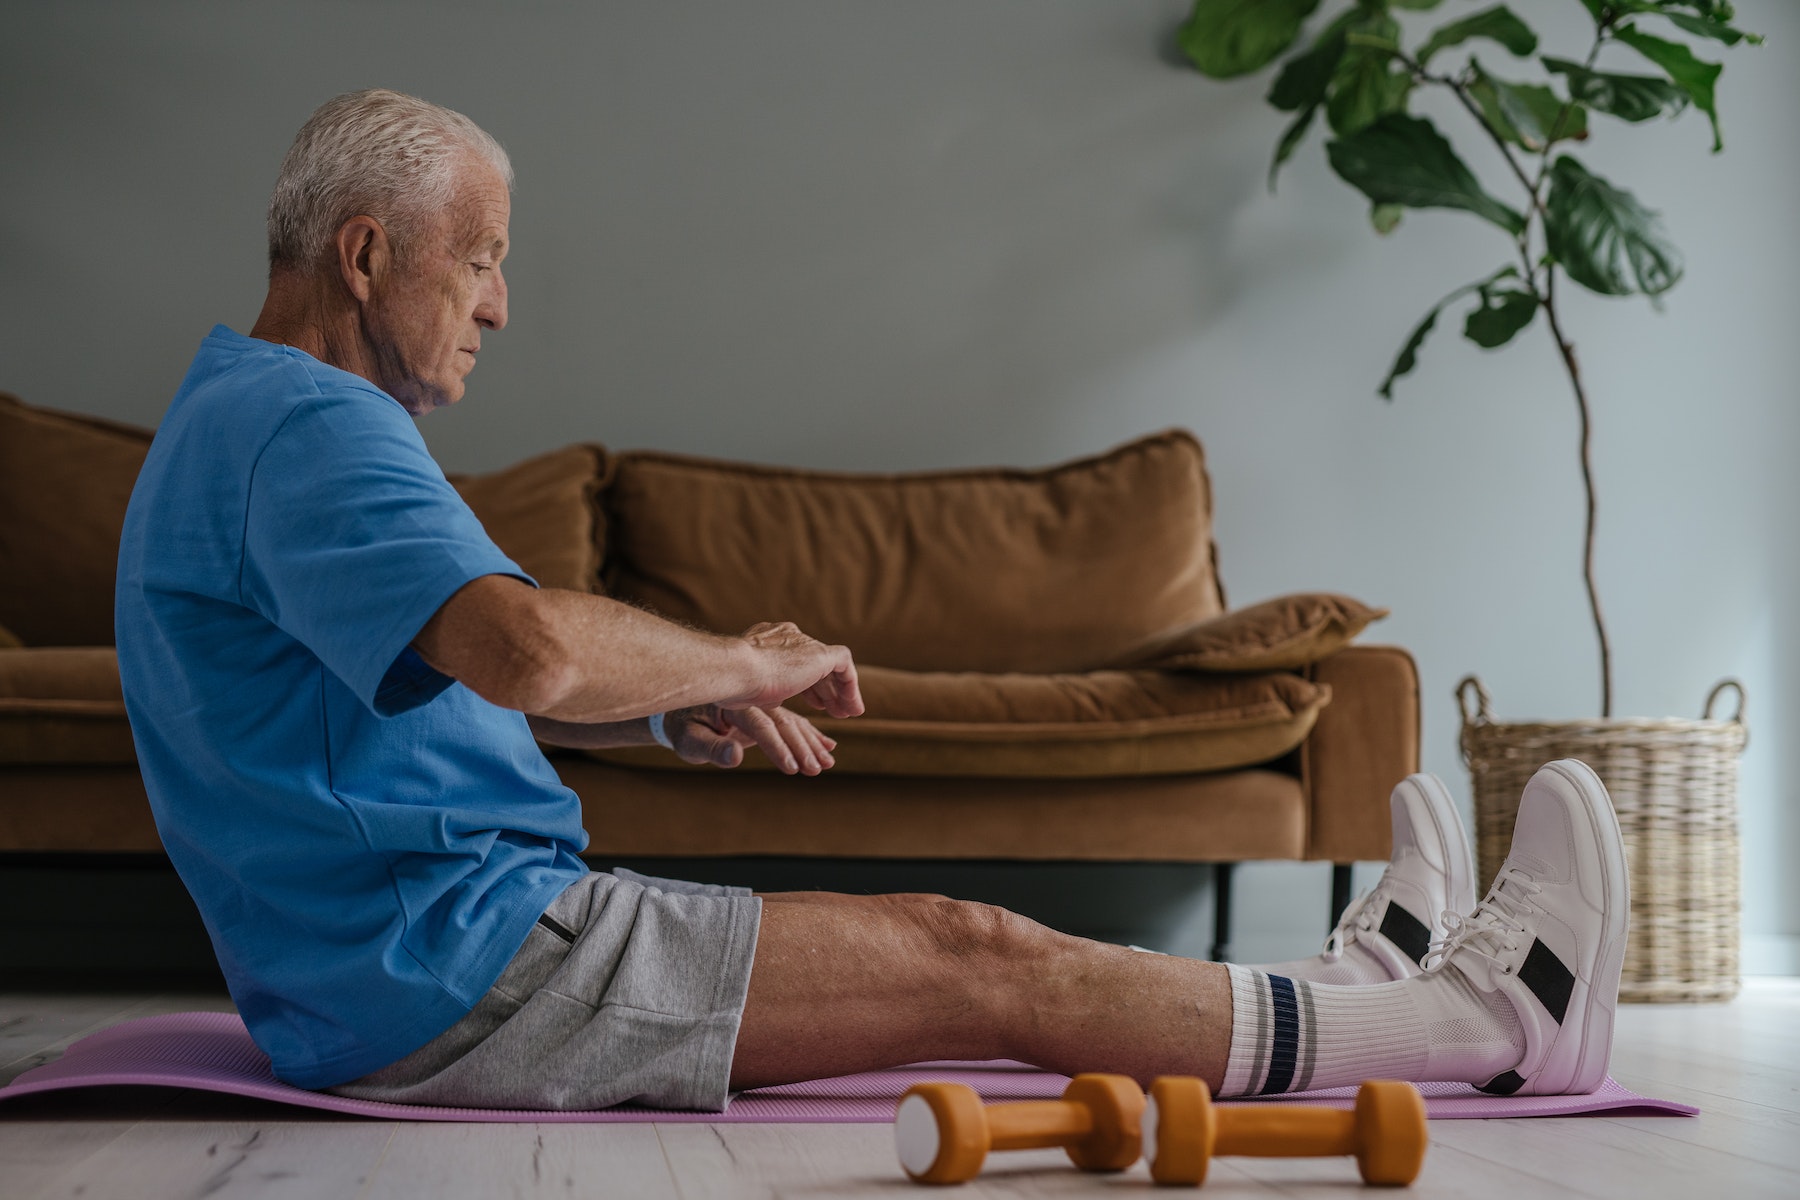 An Elderly Man in Blue Shirt and Gray Shorts Sitting on a Yoga Mat